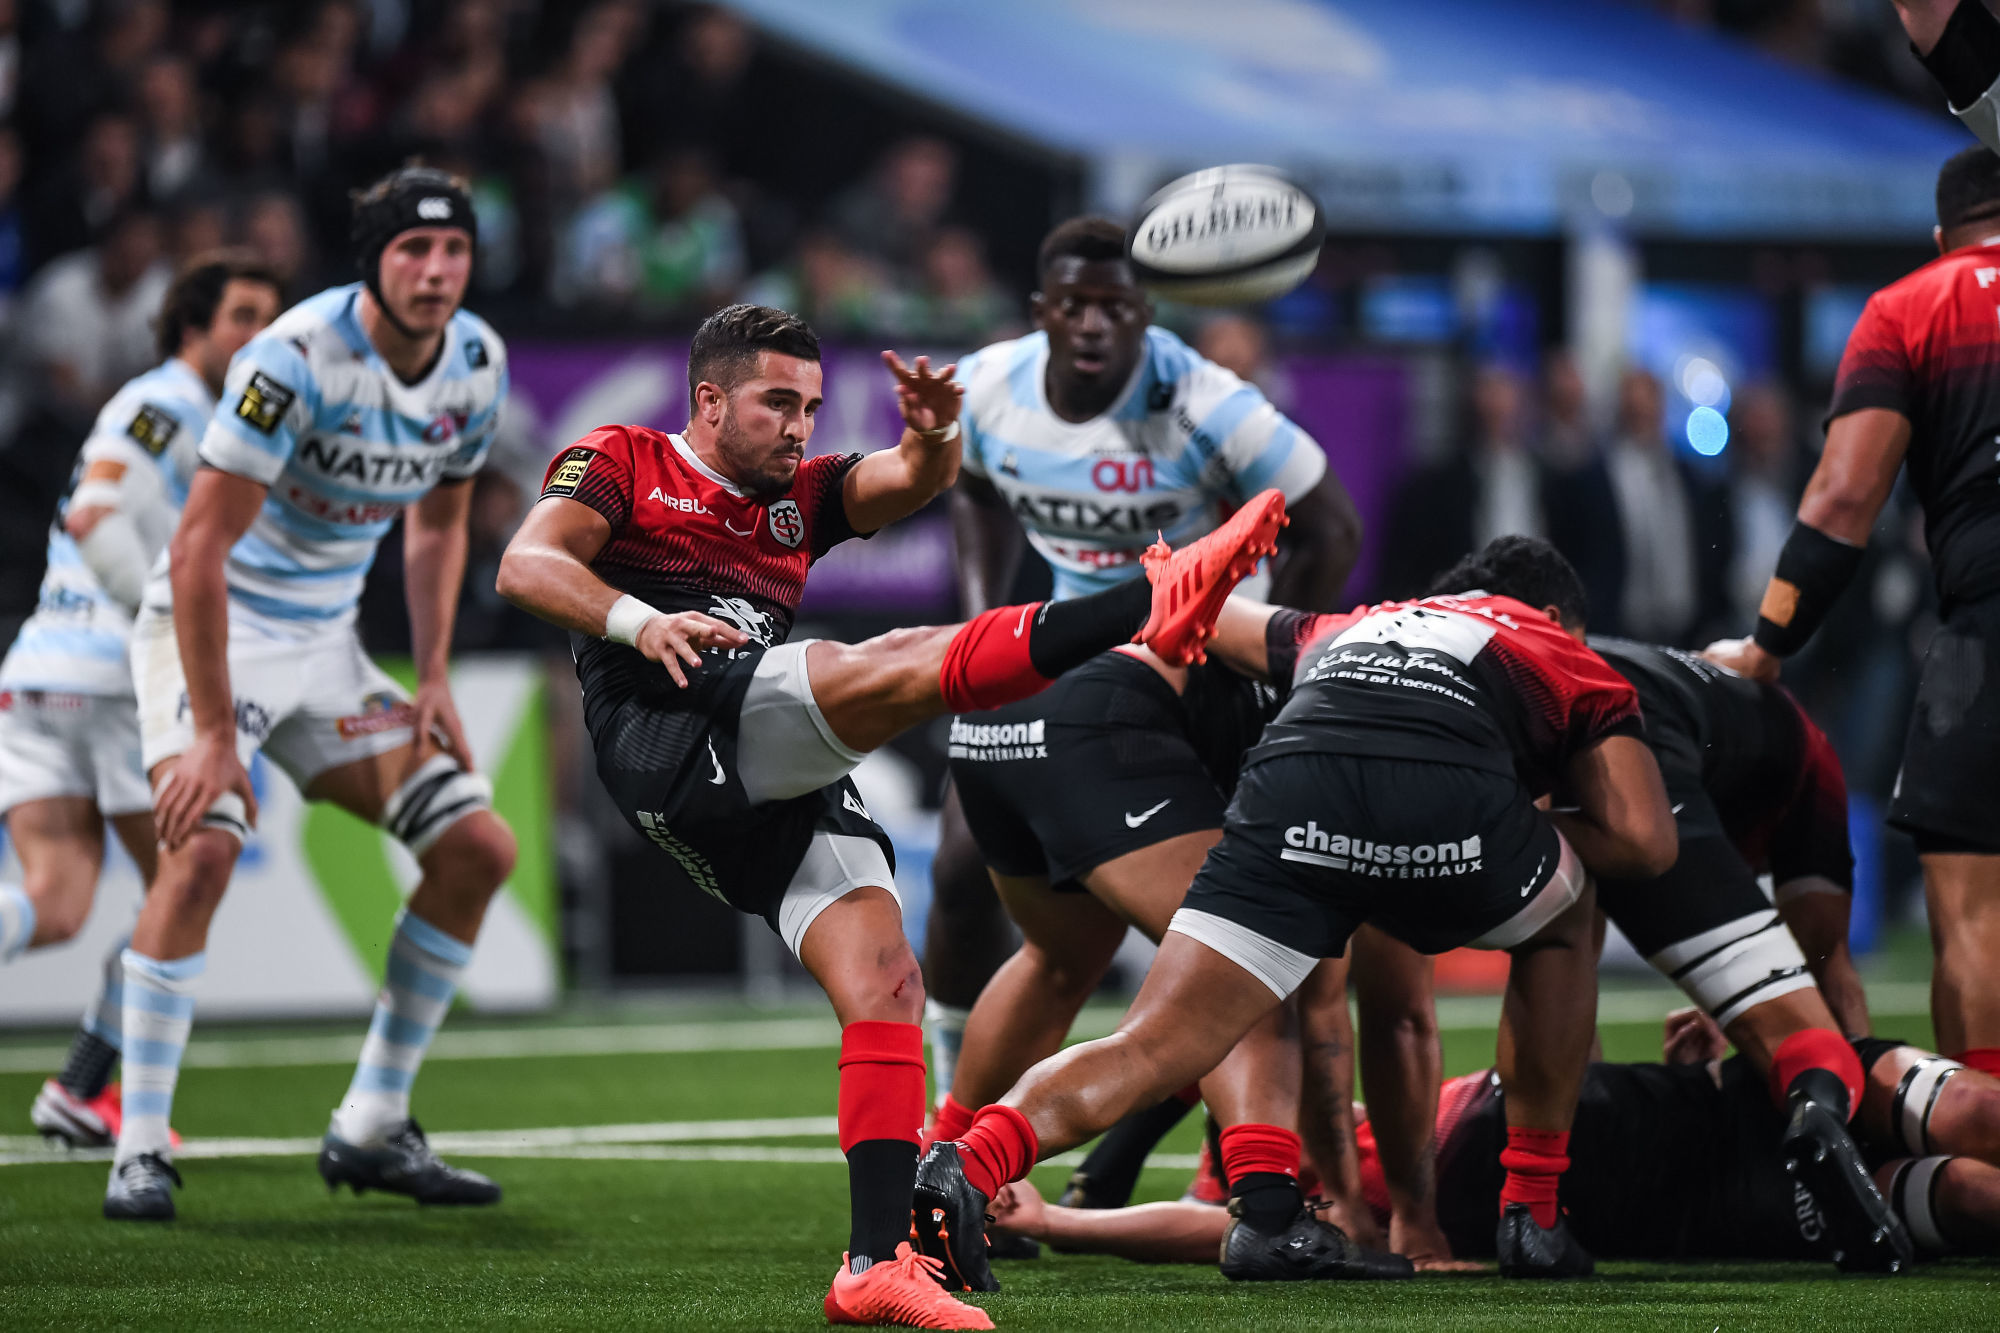 Sebastien BEZY of Toulouse during the French Top 14 Rugby match between Racing 92 and Stade Toulousain at Paris La Defense Arena on February 16, 2020 in Nanterre, France. (Photo by Baptiste Fernandez/Icon Sport) - Sebastien BEZY - Paris La Defense Arena - Paris (France)